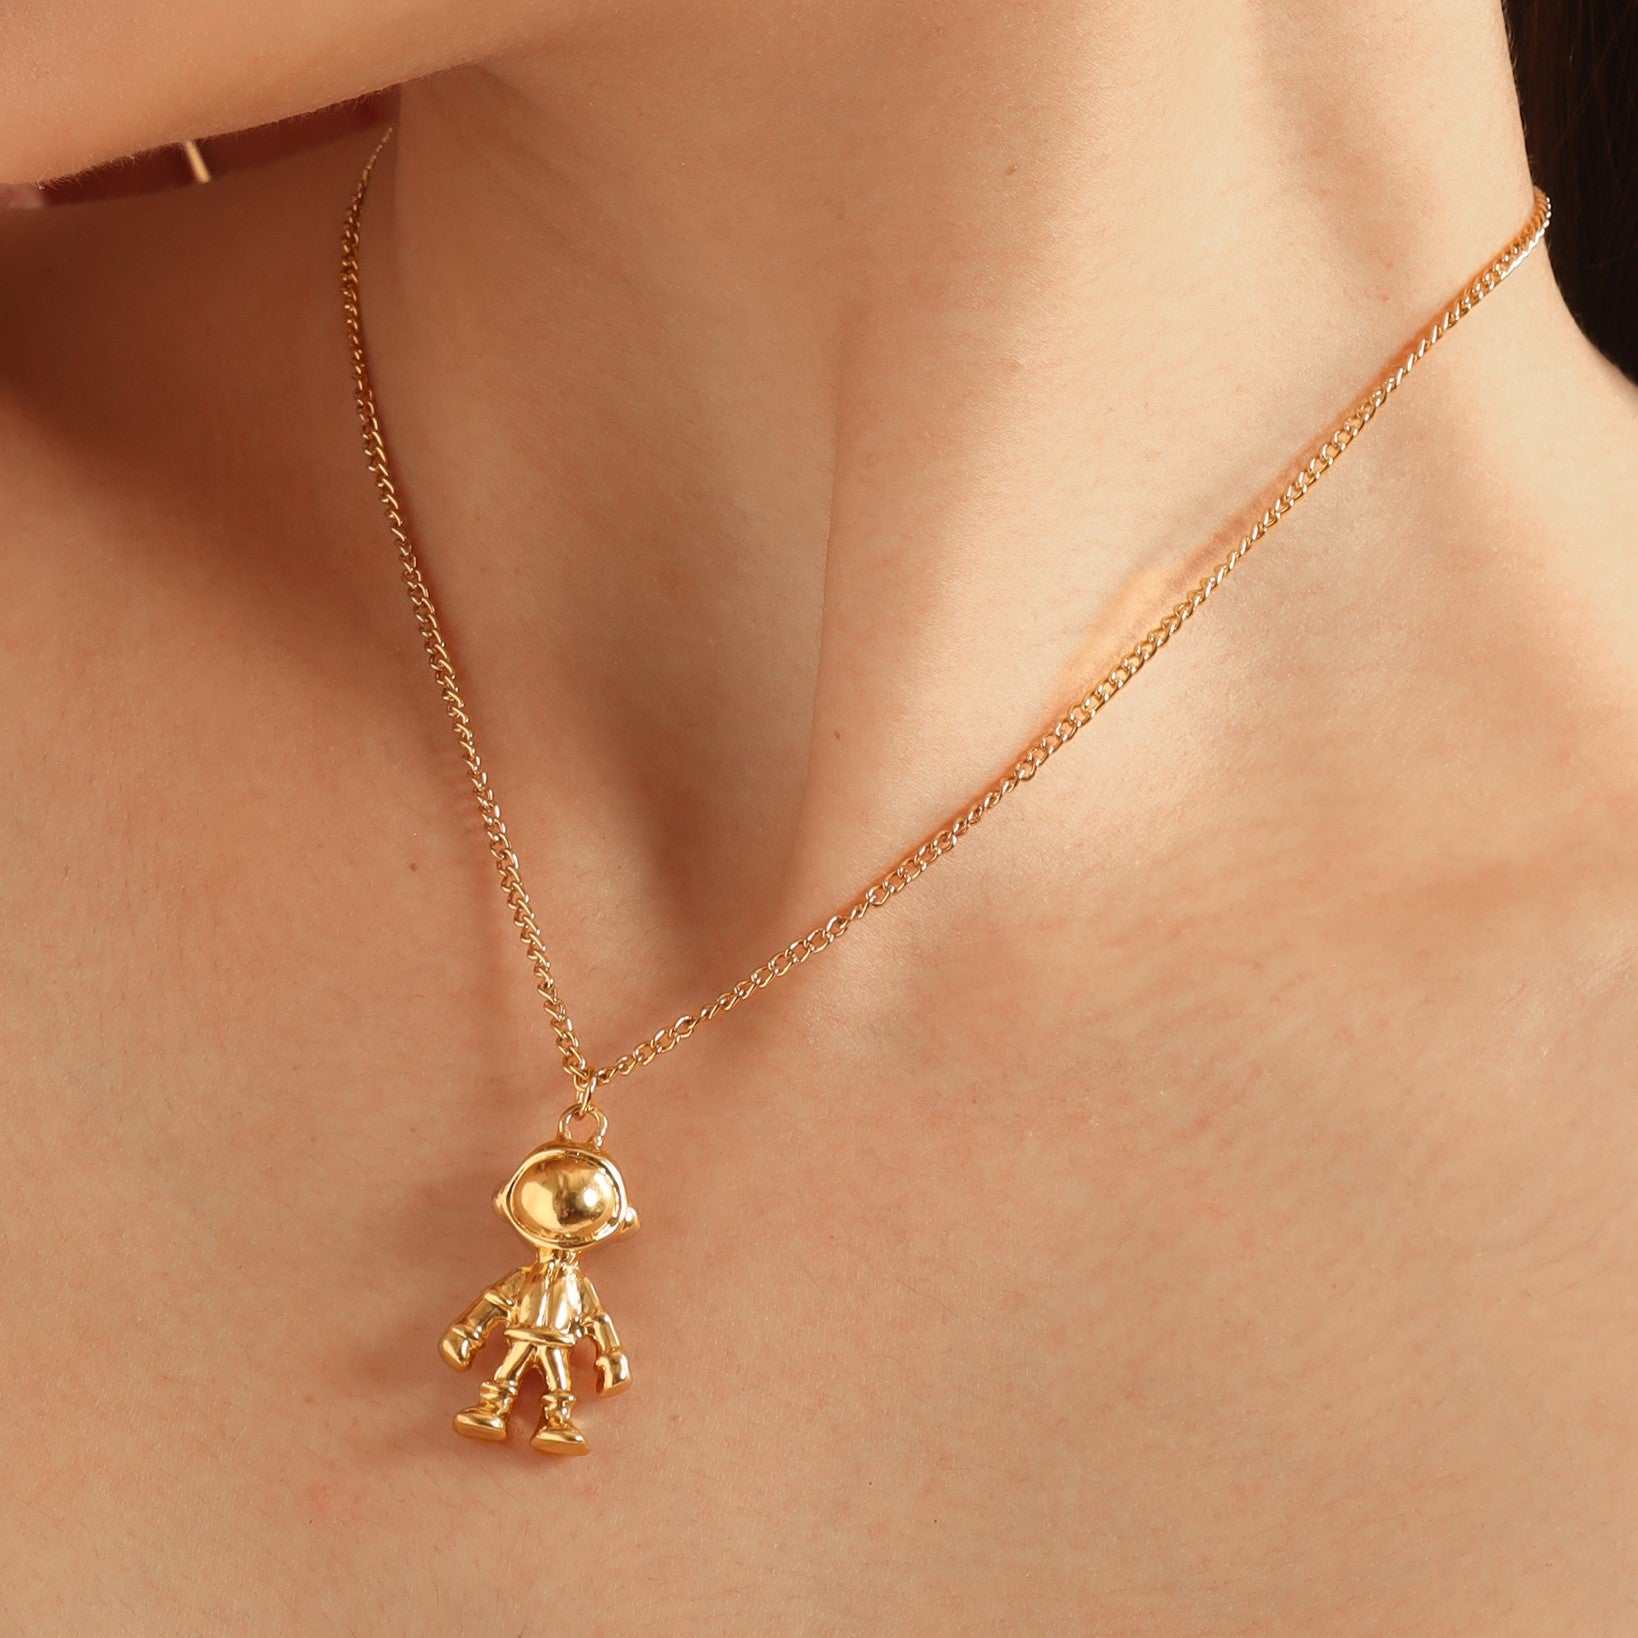 TFC Spaceman Gold Plated Pendant Necklace-Enhance your elegance with our collection of gold-plated necklaces for women. Choose from stunning pendant necklaces, chic choker necklaces, and trendy layered necklaces. Our sleek and dainty designs are both affordable and anti-tarnish, ensuring lasting beauty. Enjoy the cheapest fashion jewellery, lightweight and stylish- only at The Fun Company